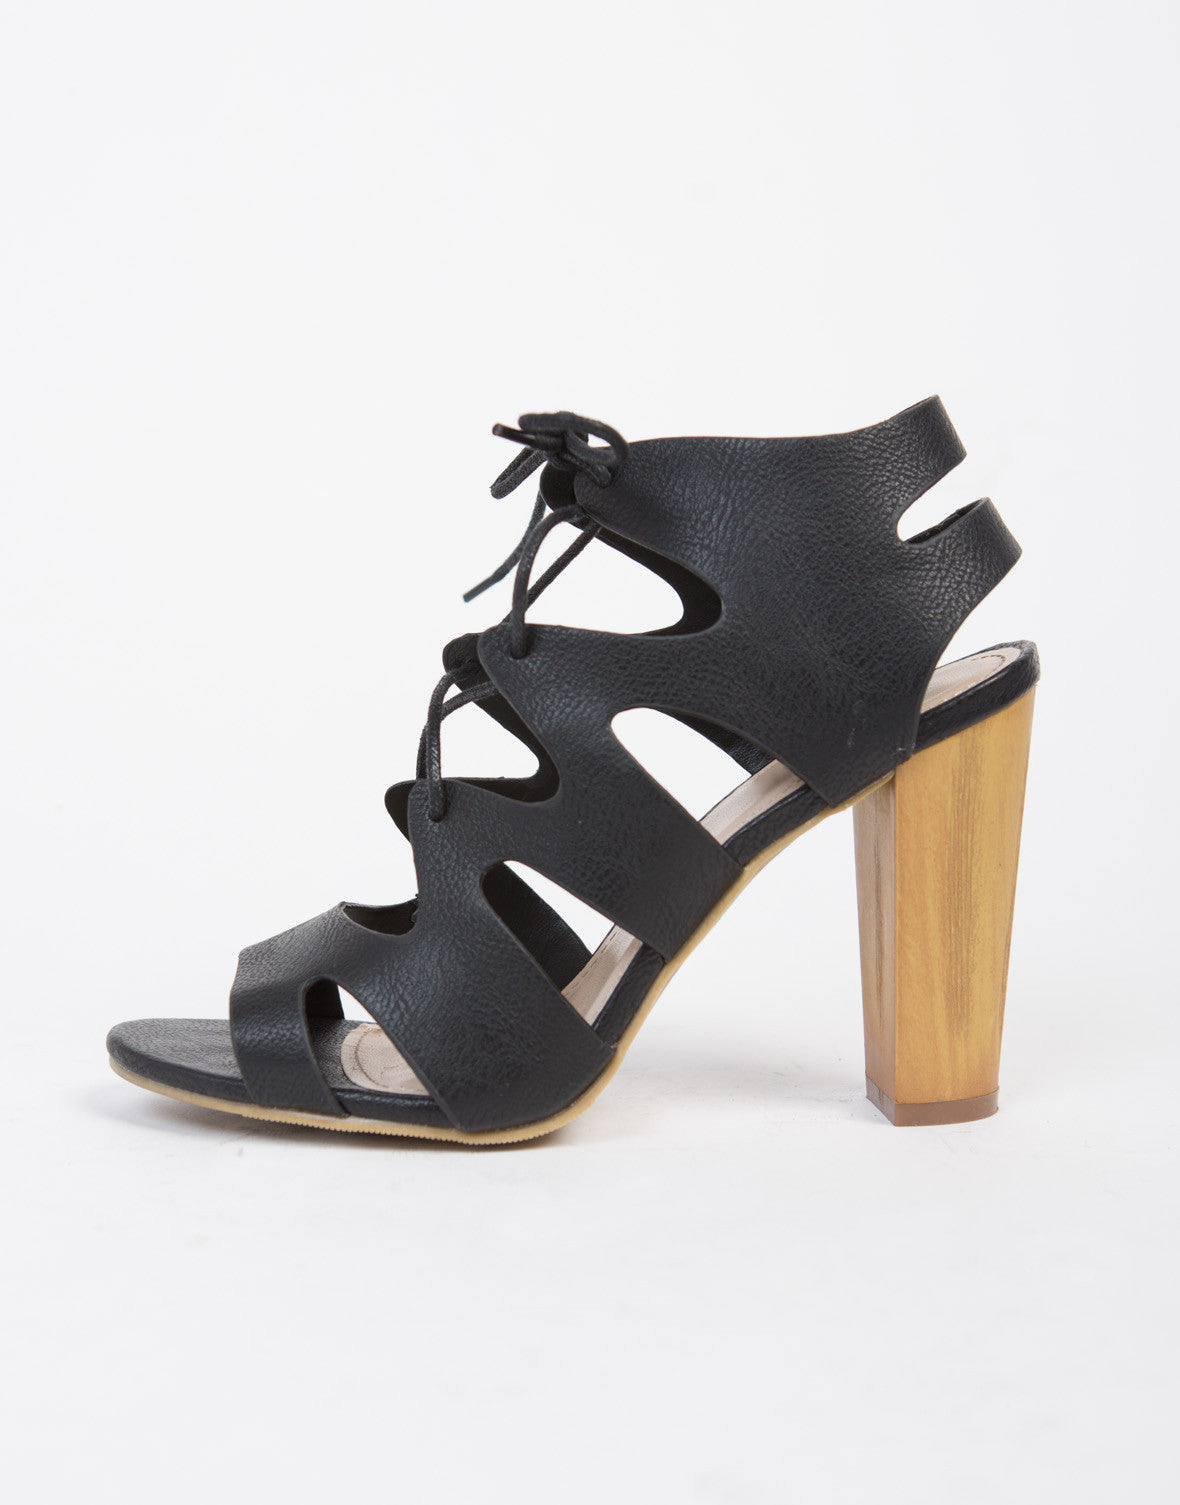 strappy heels with thick heel